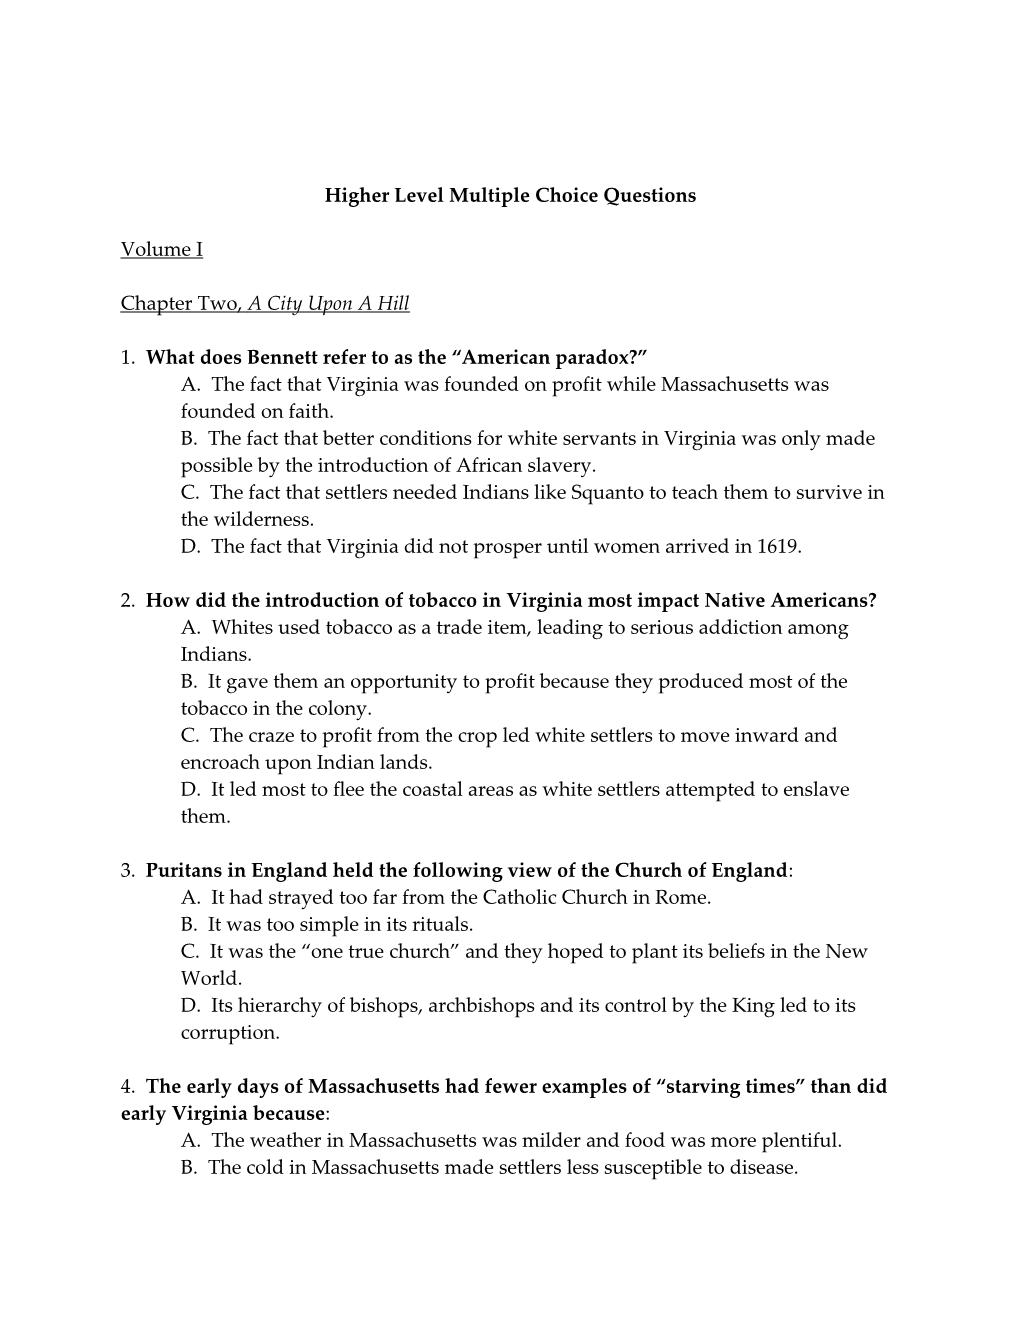 Higher Level Multiple Choice Questions s1